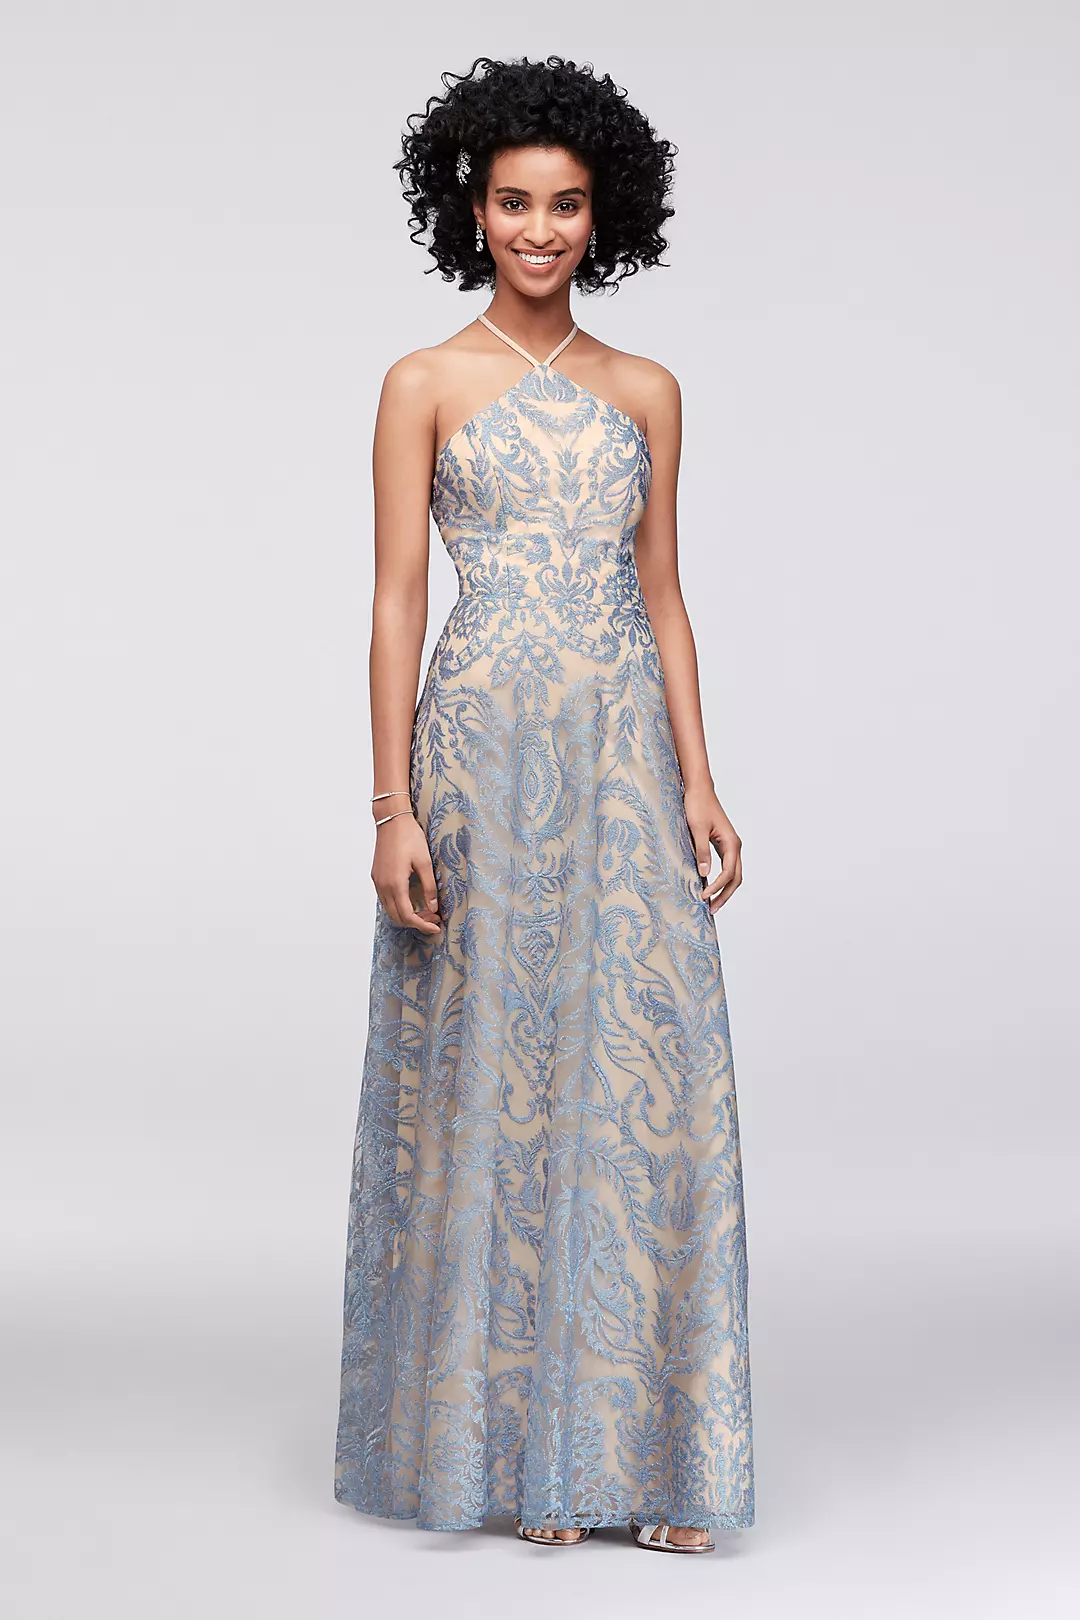 Embroidered Illusion Halter Gown with Strappy Back Image